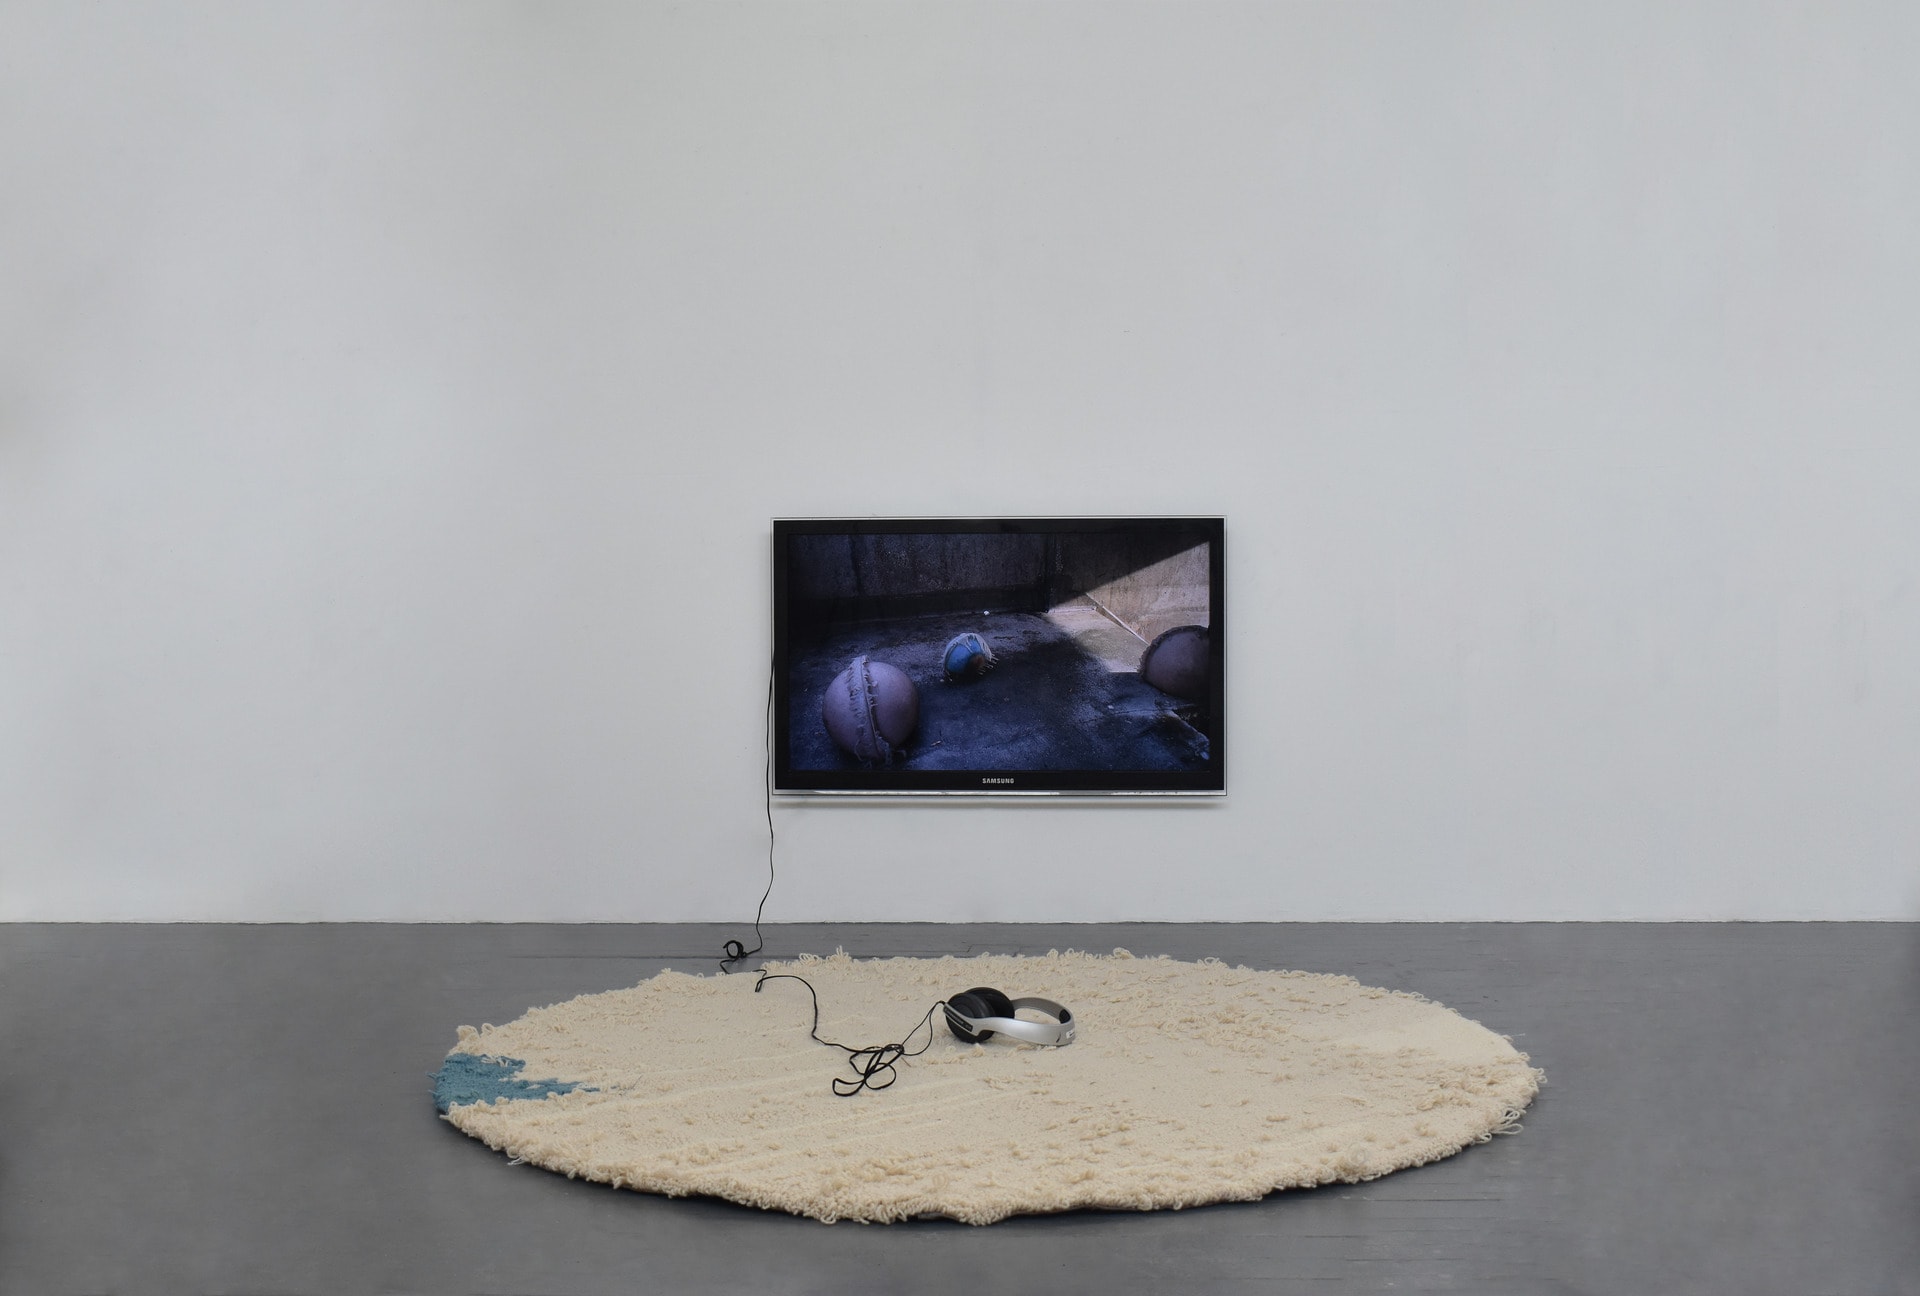 Hand Tufted rug in front of screen displaying cyclical video of silicone orbs rocking.